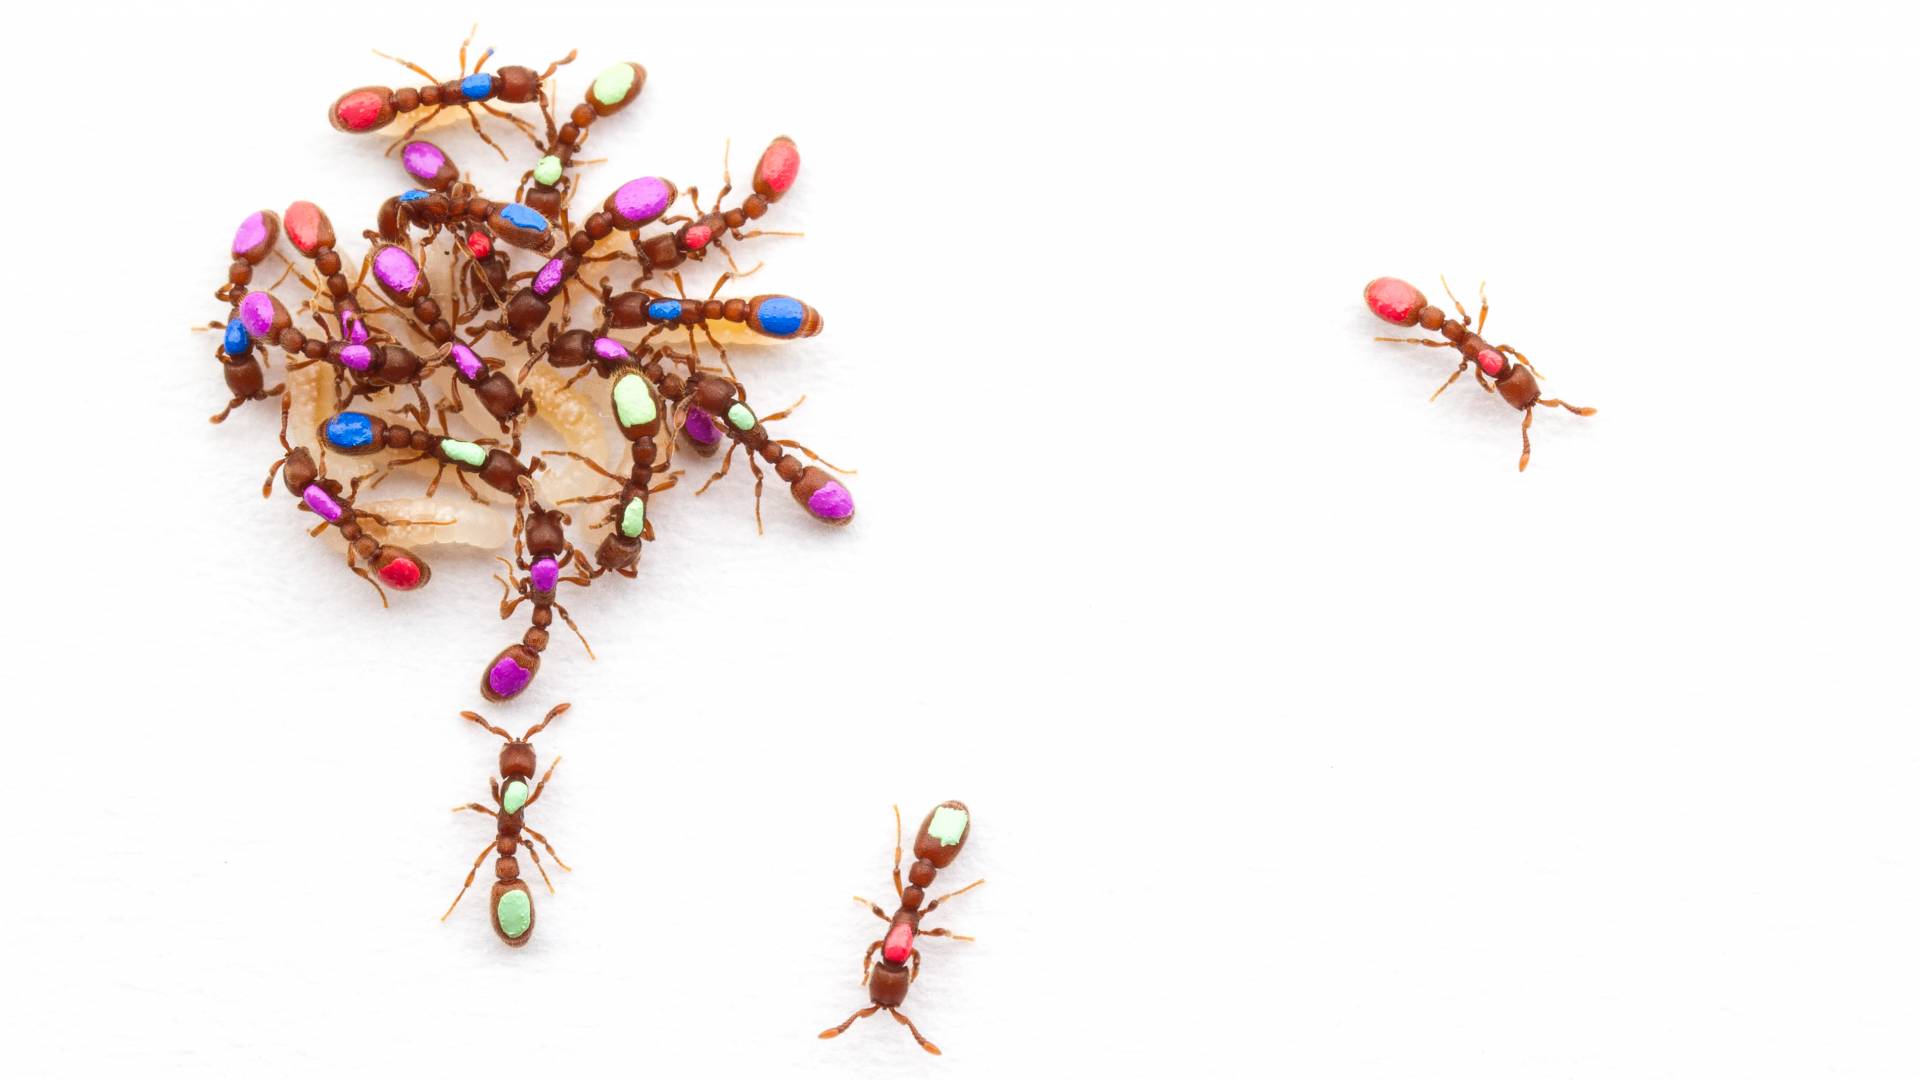 Ant-y social: Successful ant colonies hint at how societies evolve